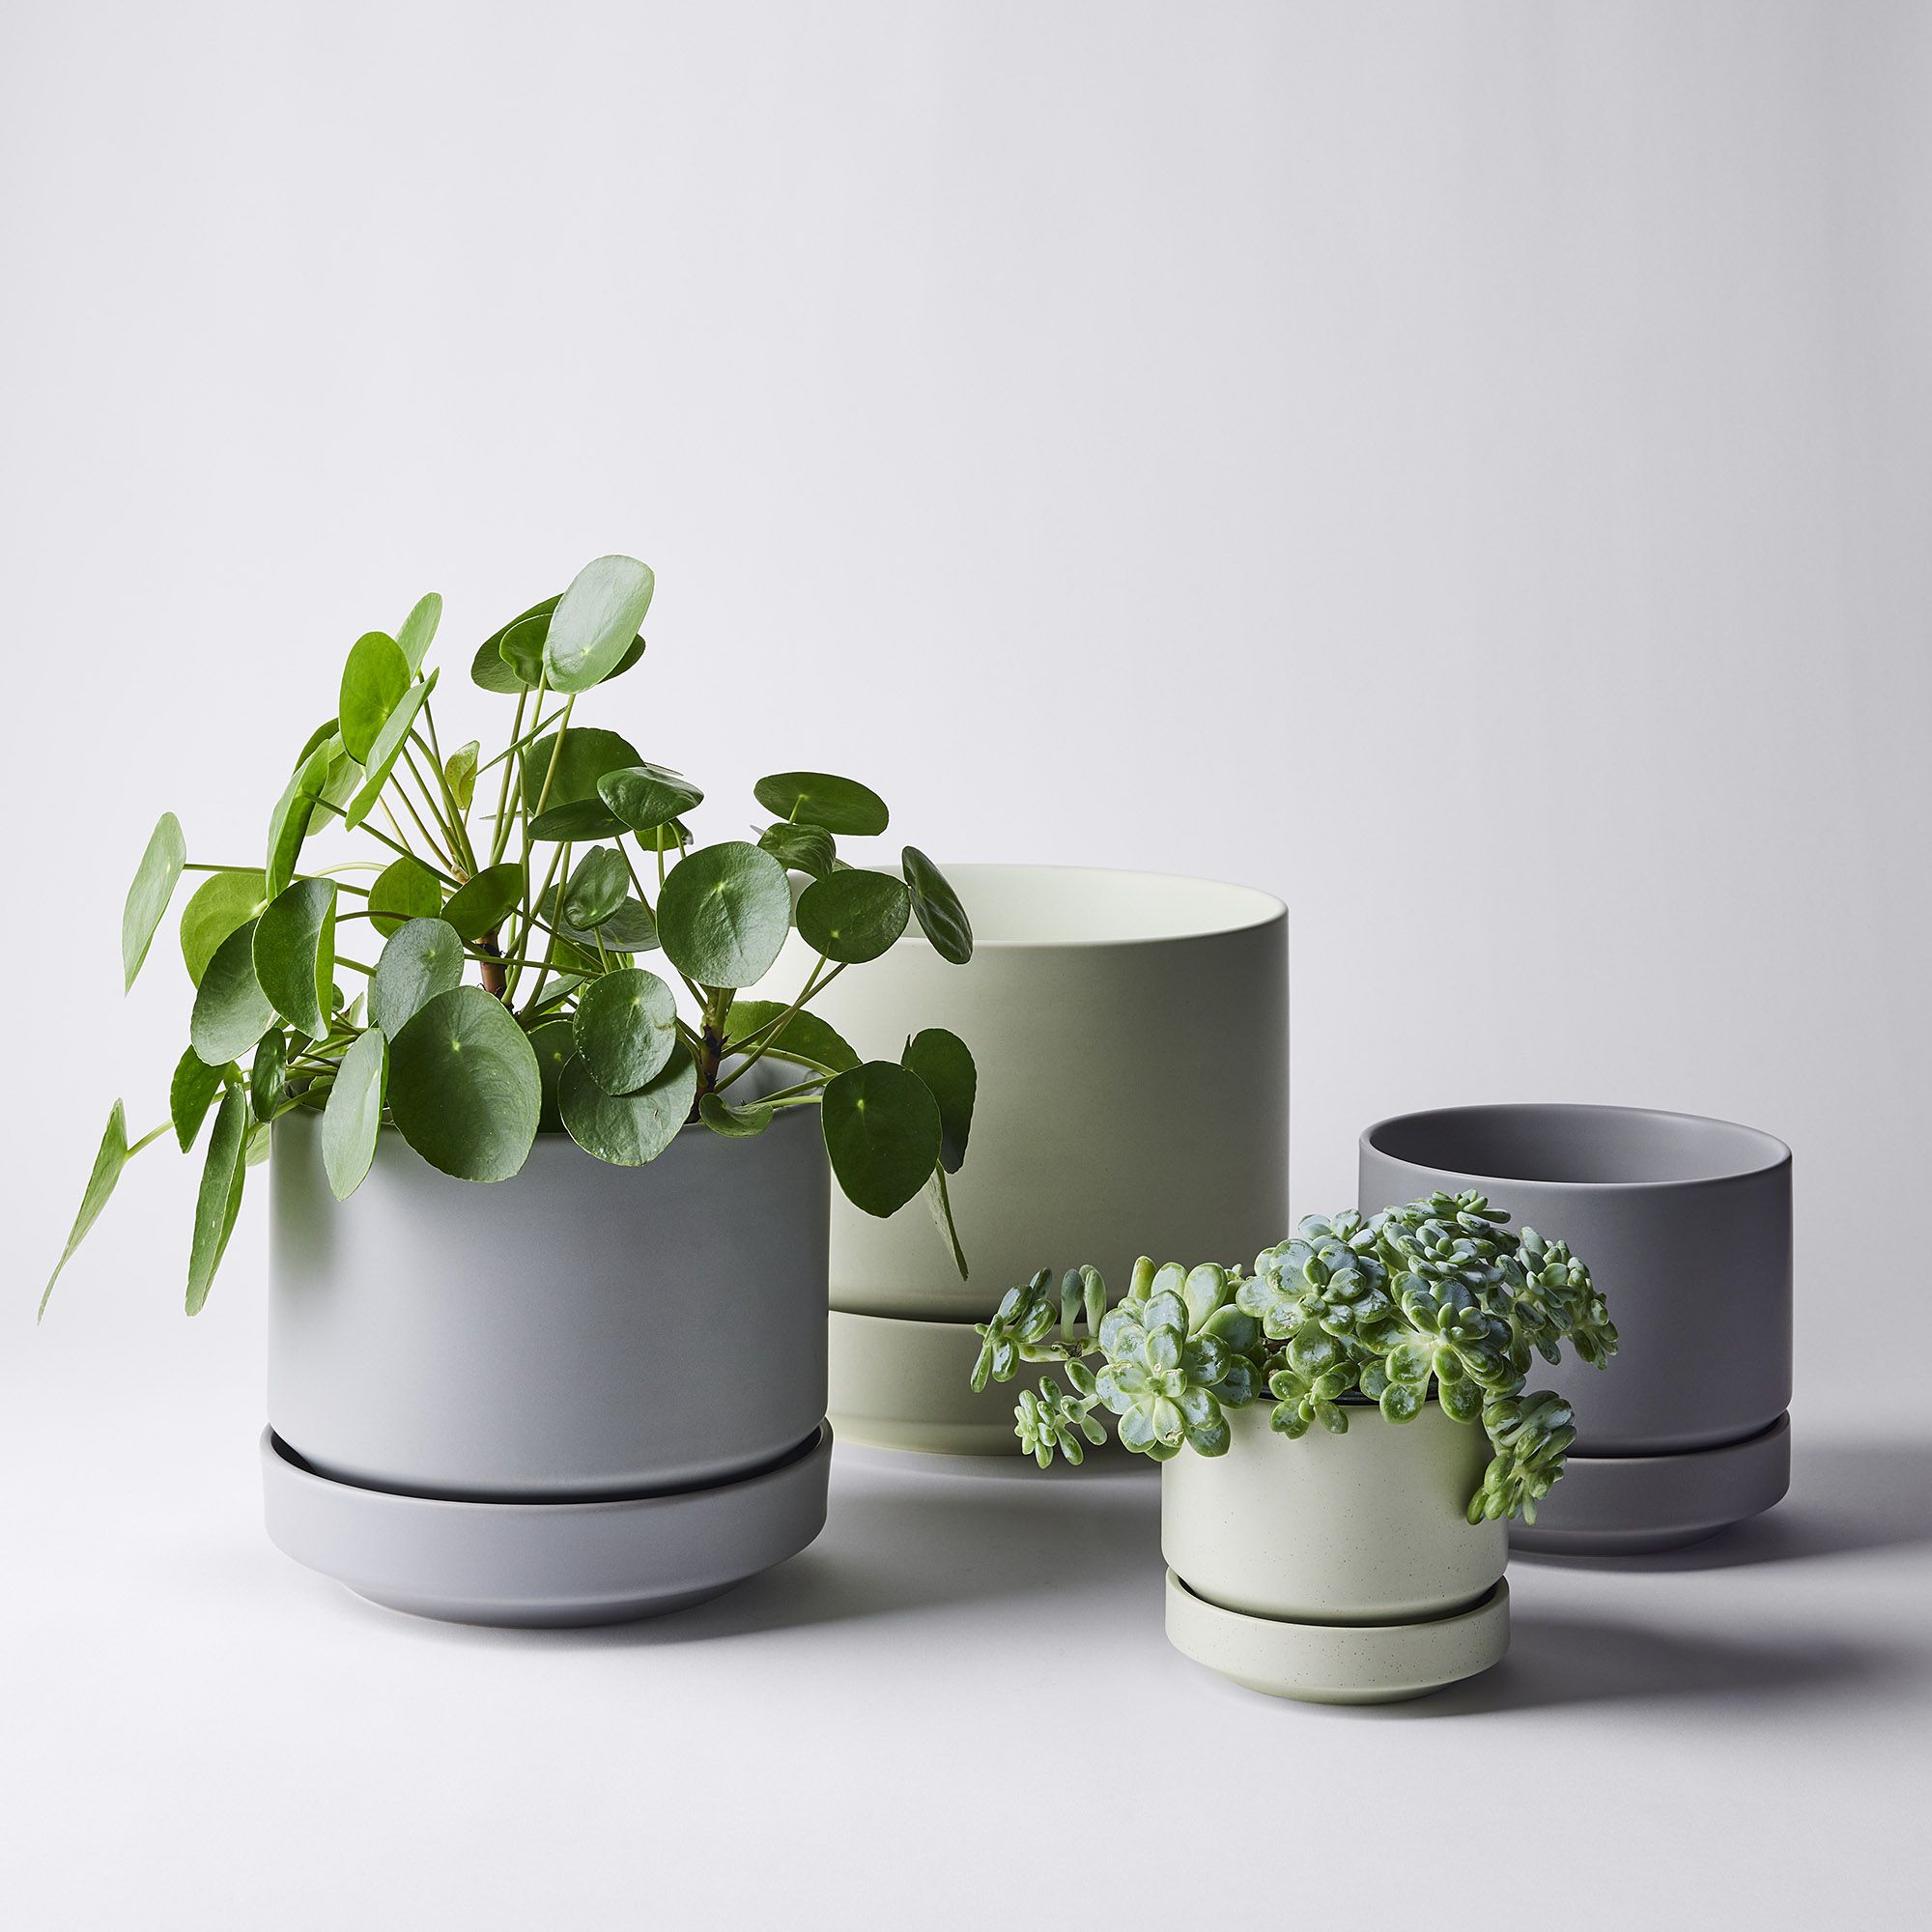 High-Fired Stoneware Planters on Food52